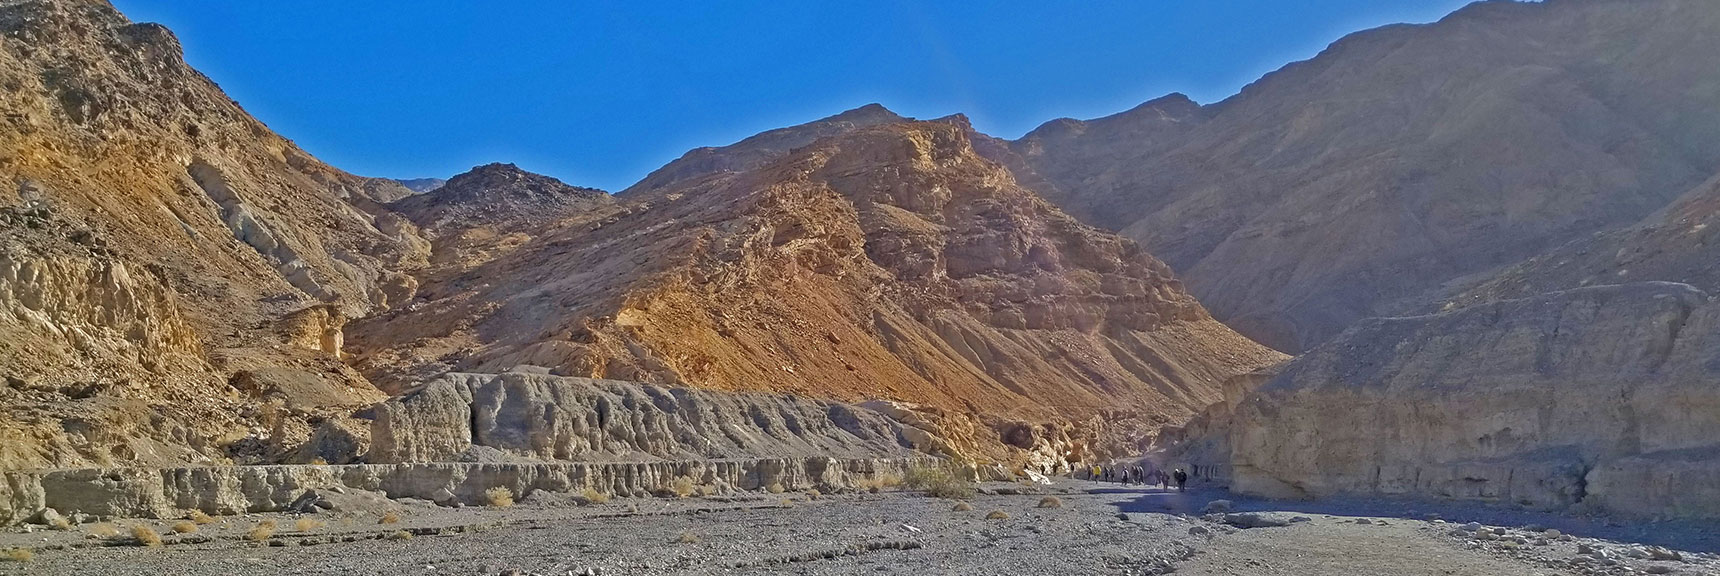 Starting Up Mosaic Canyon Just Beyond the Trailhead | Mosaic Canyon, Above Stovepipe Wells, Death Valley National Park, California